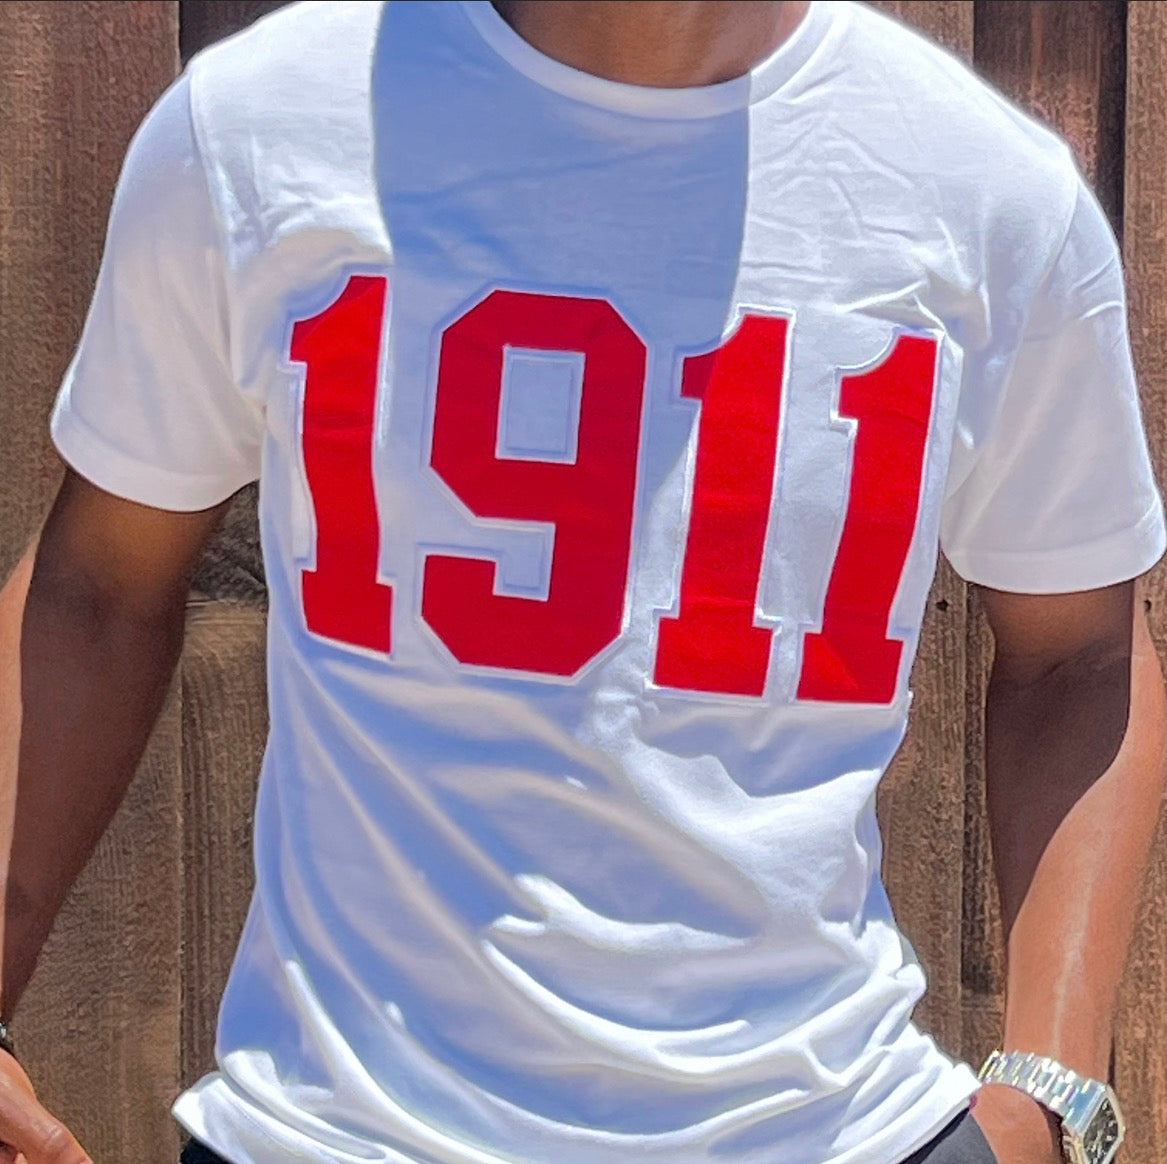 Alpha Red Psi Nupekave Embroidery Kappa – White/ T 1911 - Shirt